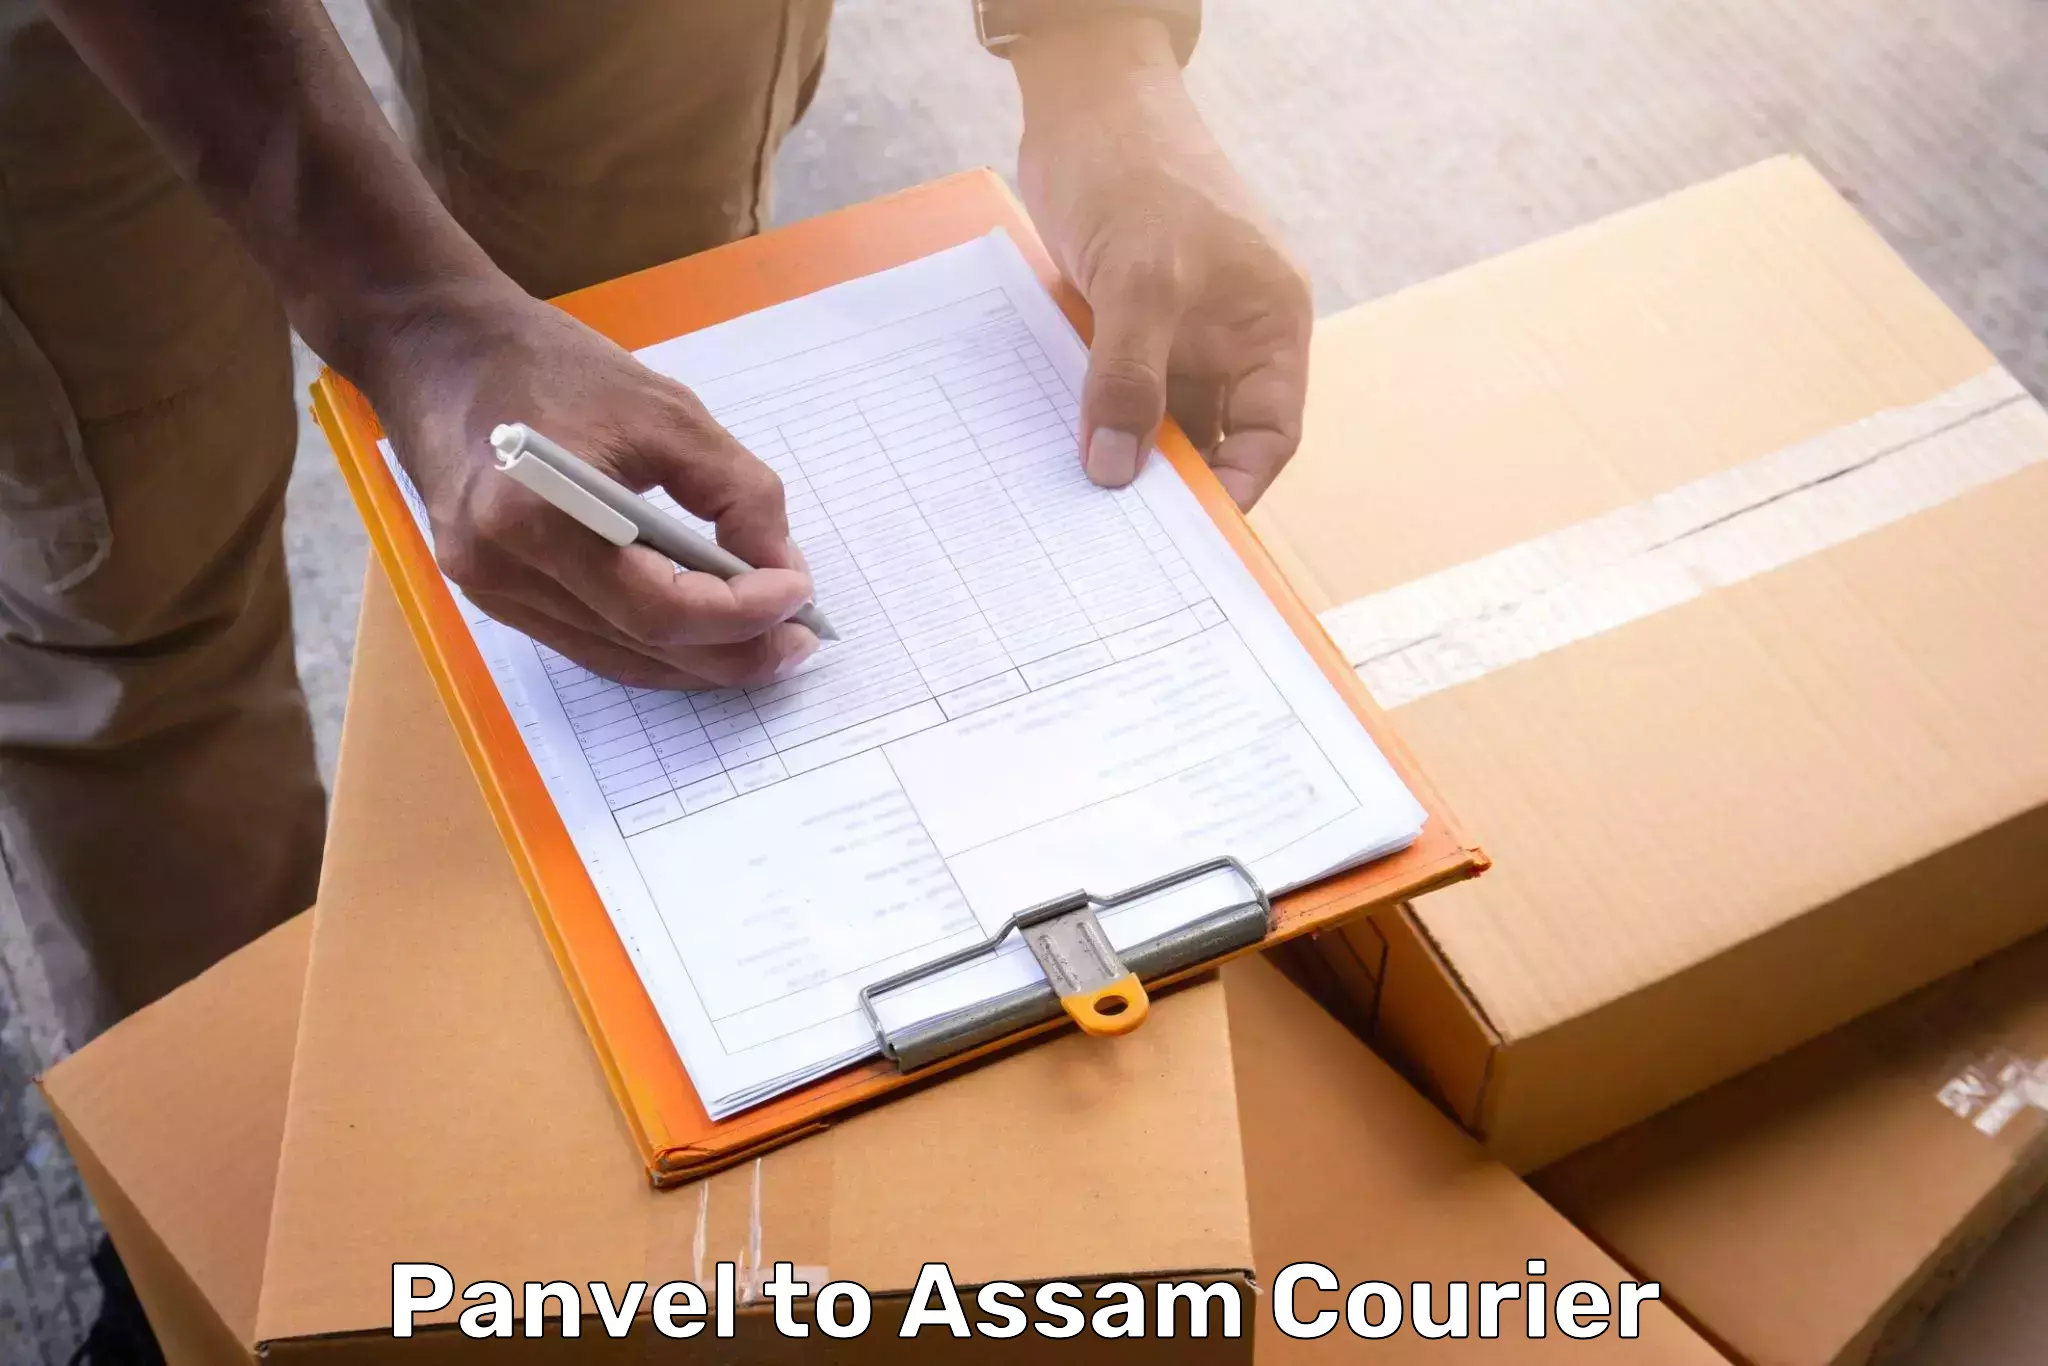 Instant baggage transport quote Panvel to Tezpur